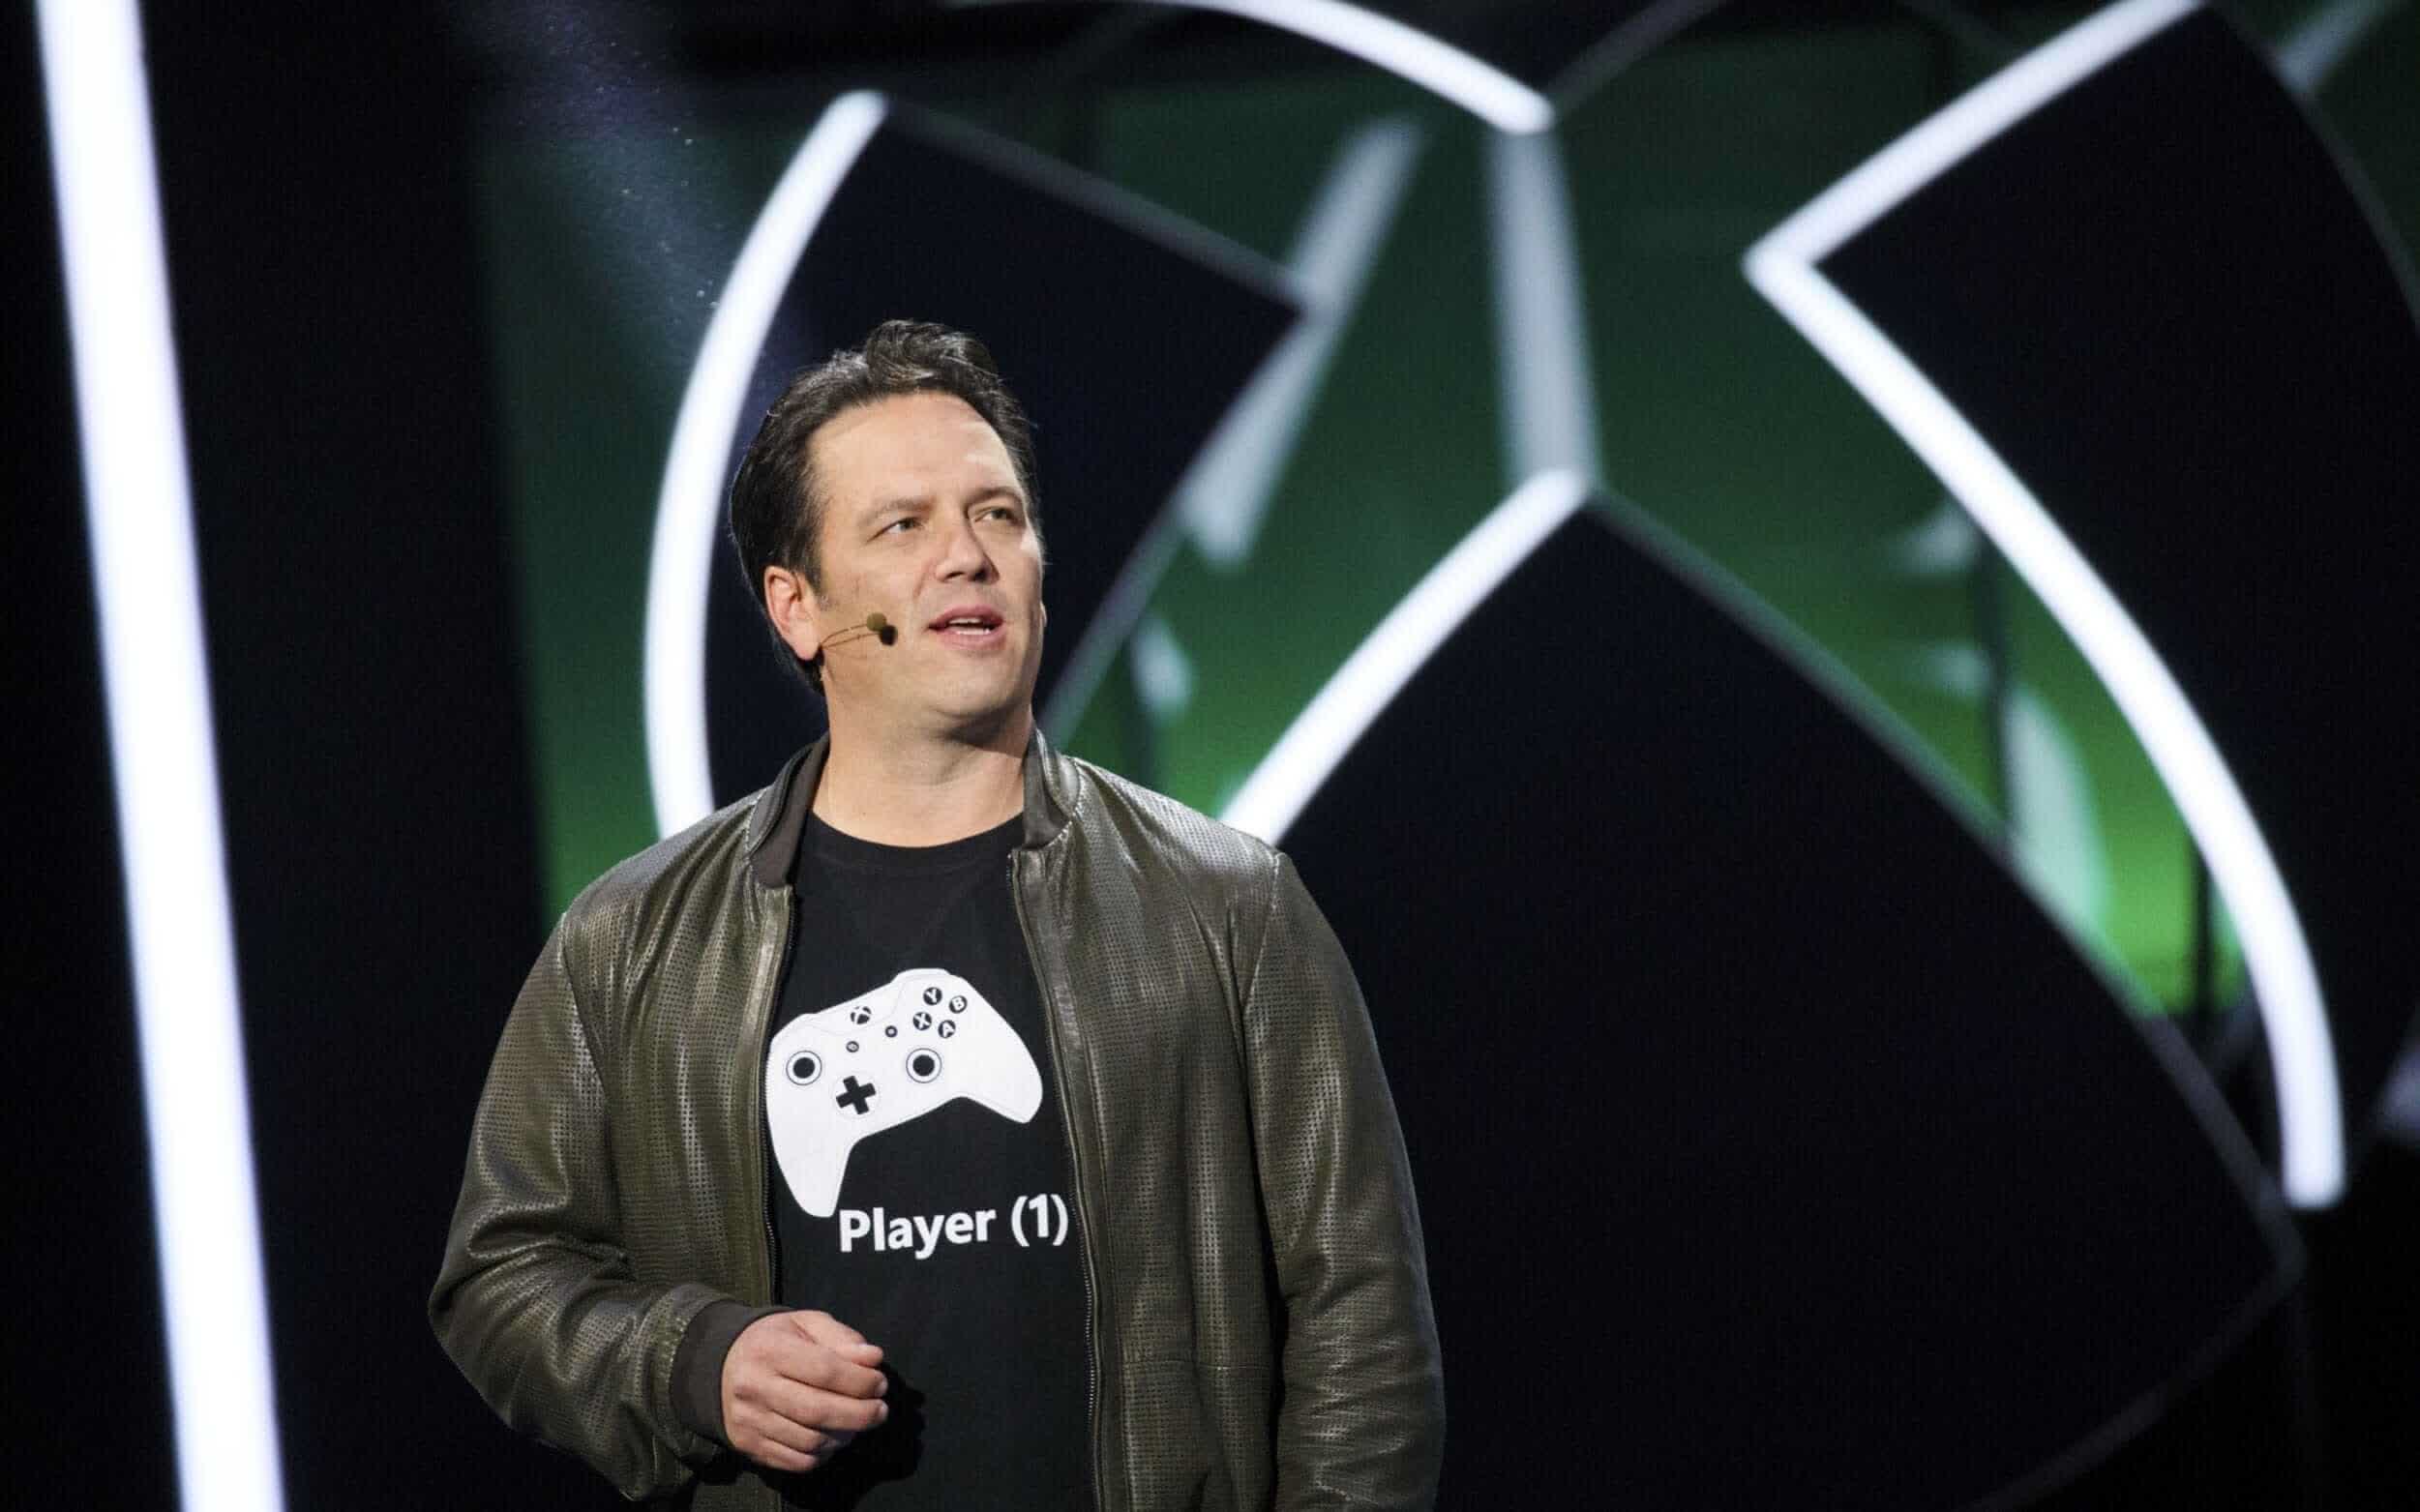 Phil Spencer says Xbox is 'evaluating all aspects' of its relationship with Activision Blizzard